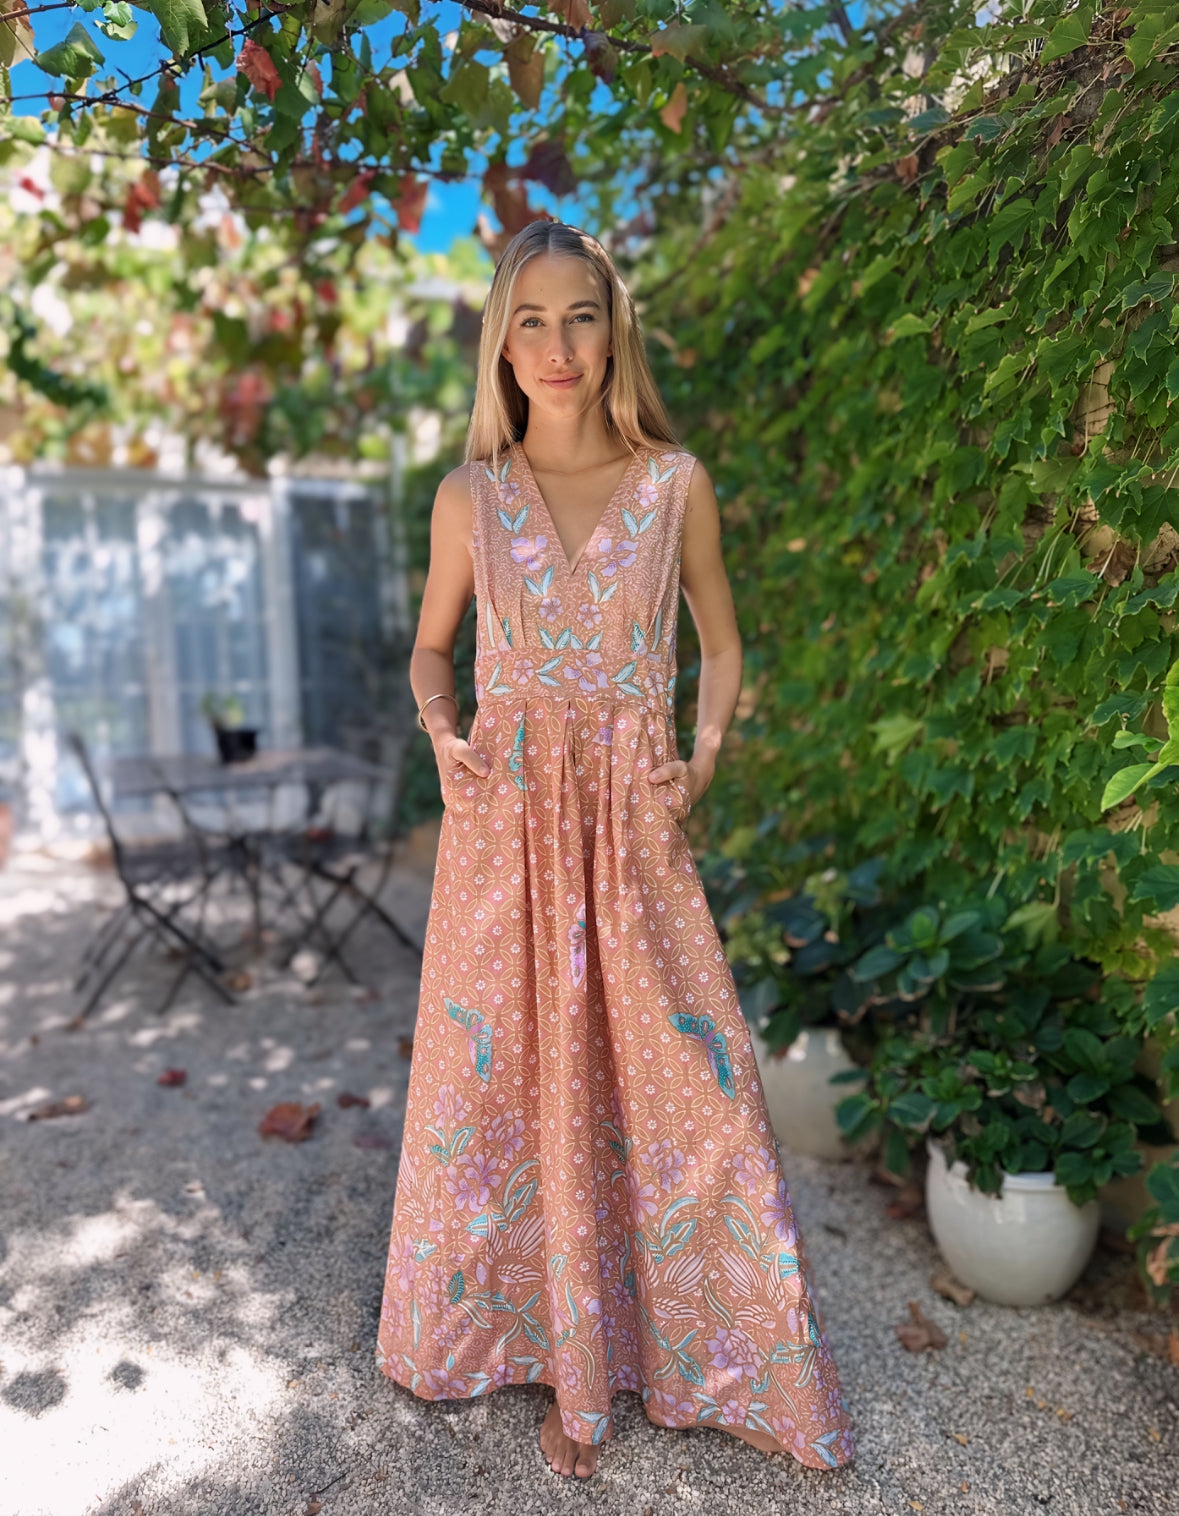 This timeless, cotton Batik dress has a classic cut that never goes out of style. Perfect for effortless casual chic, simply throw it on and pair with one of our straw hats, sandals, and your choice of beach bag or picnic basket. Iridescent Sea Fremantle